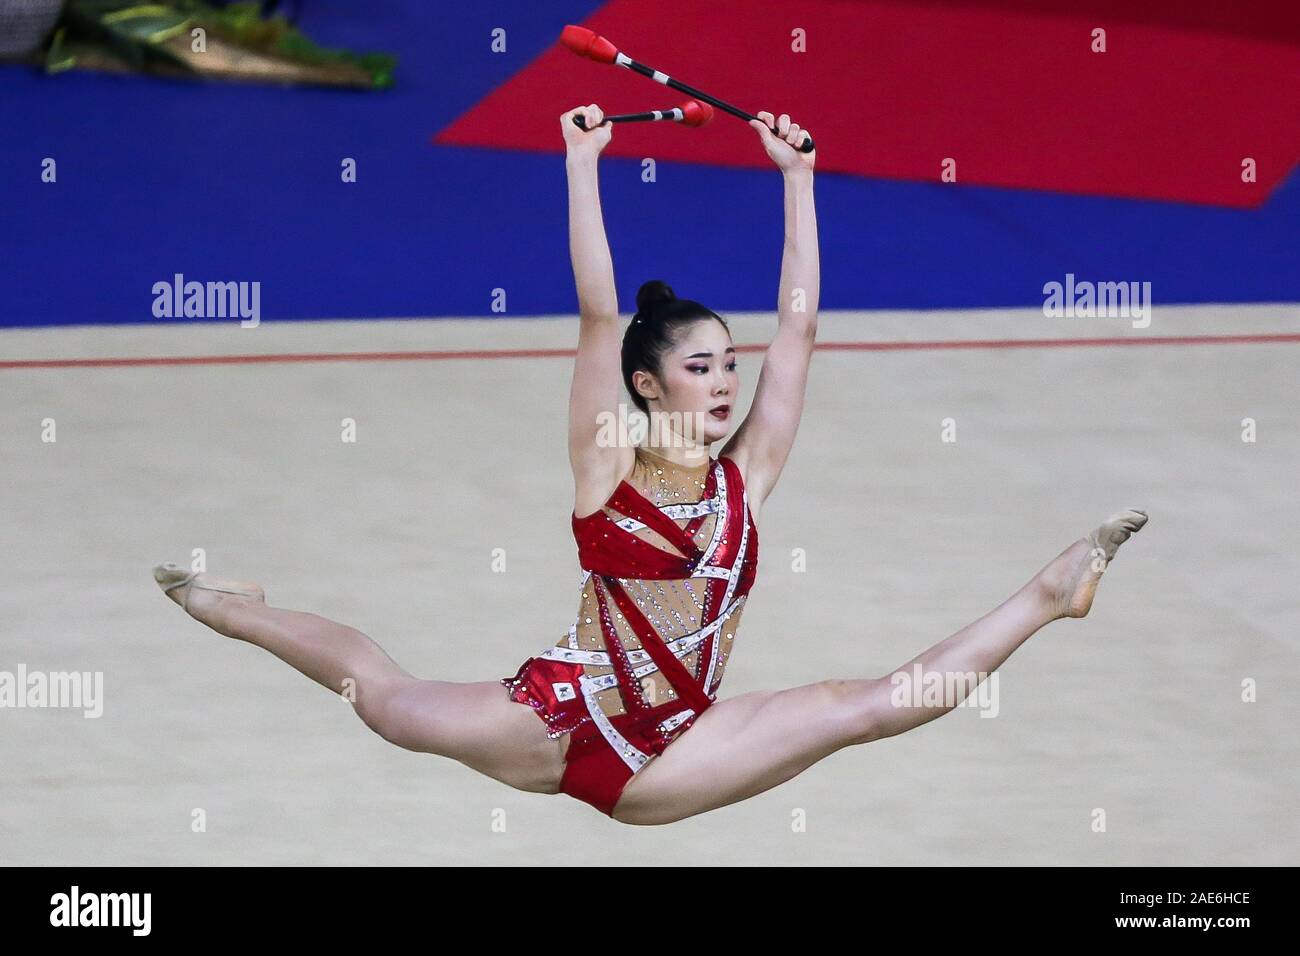 https://c8.alamy.com/comp/2AE6HCE/pasay-city-philippines-7th-dec-2019-benjaporn-limpanich-of-thailand-performs-during-the-womens-rhythmic-gymnastics-clubs-finals-at-the-sea-games-2019-in-manila-the-philippines-dec-7-2019-credit-rouelle-umalixinhuaalamy-live-news-2AE6HCE.jpg